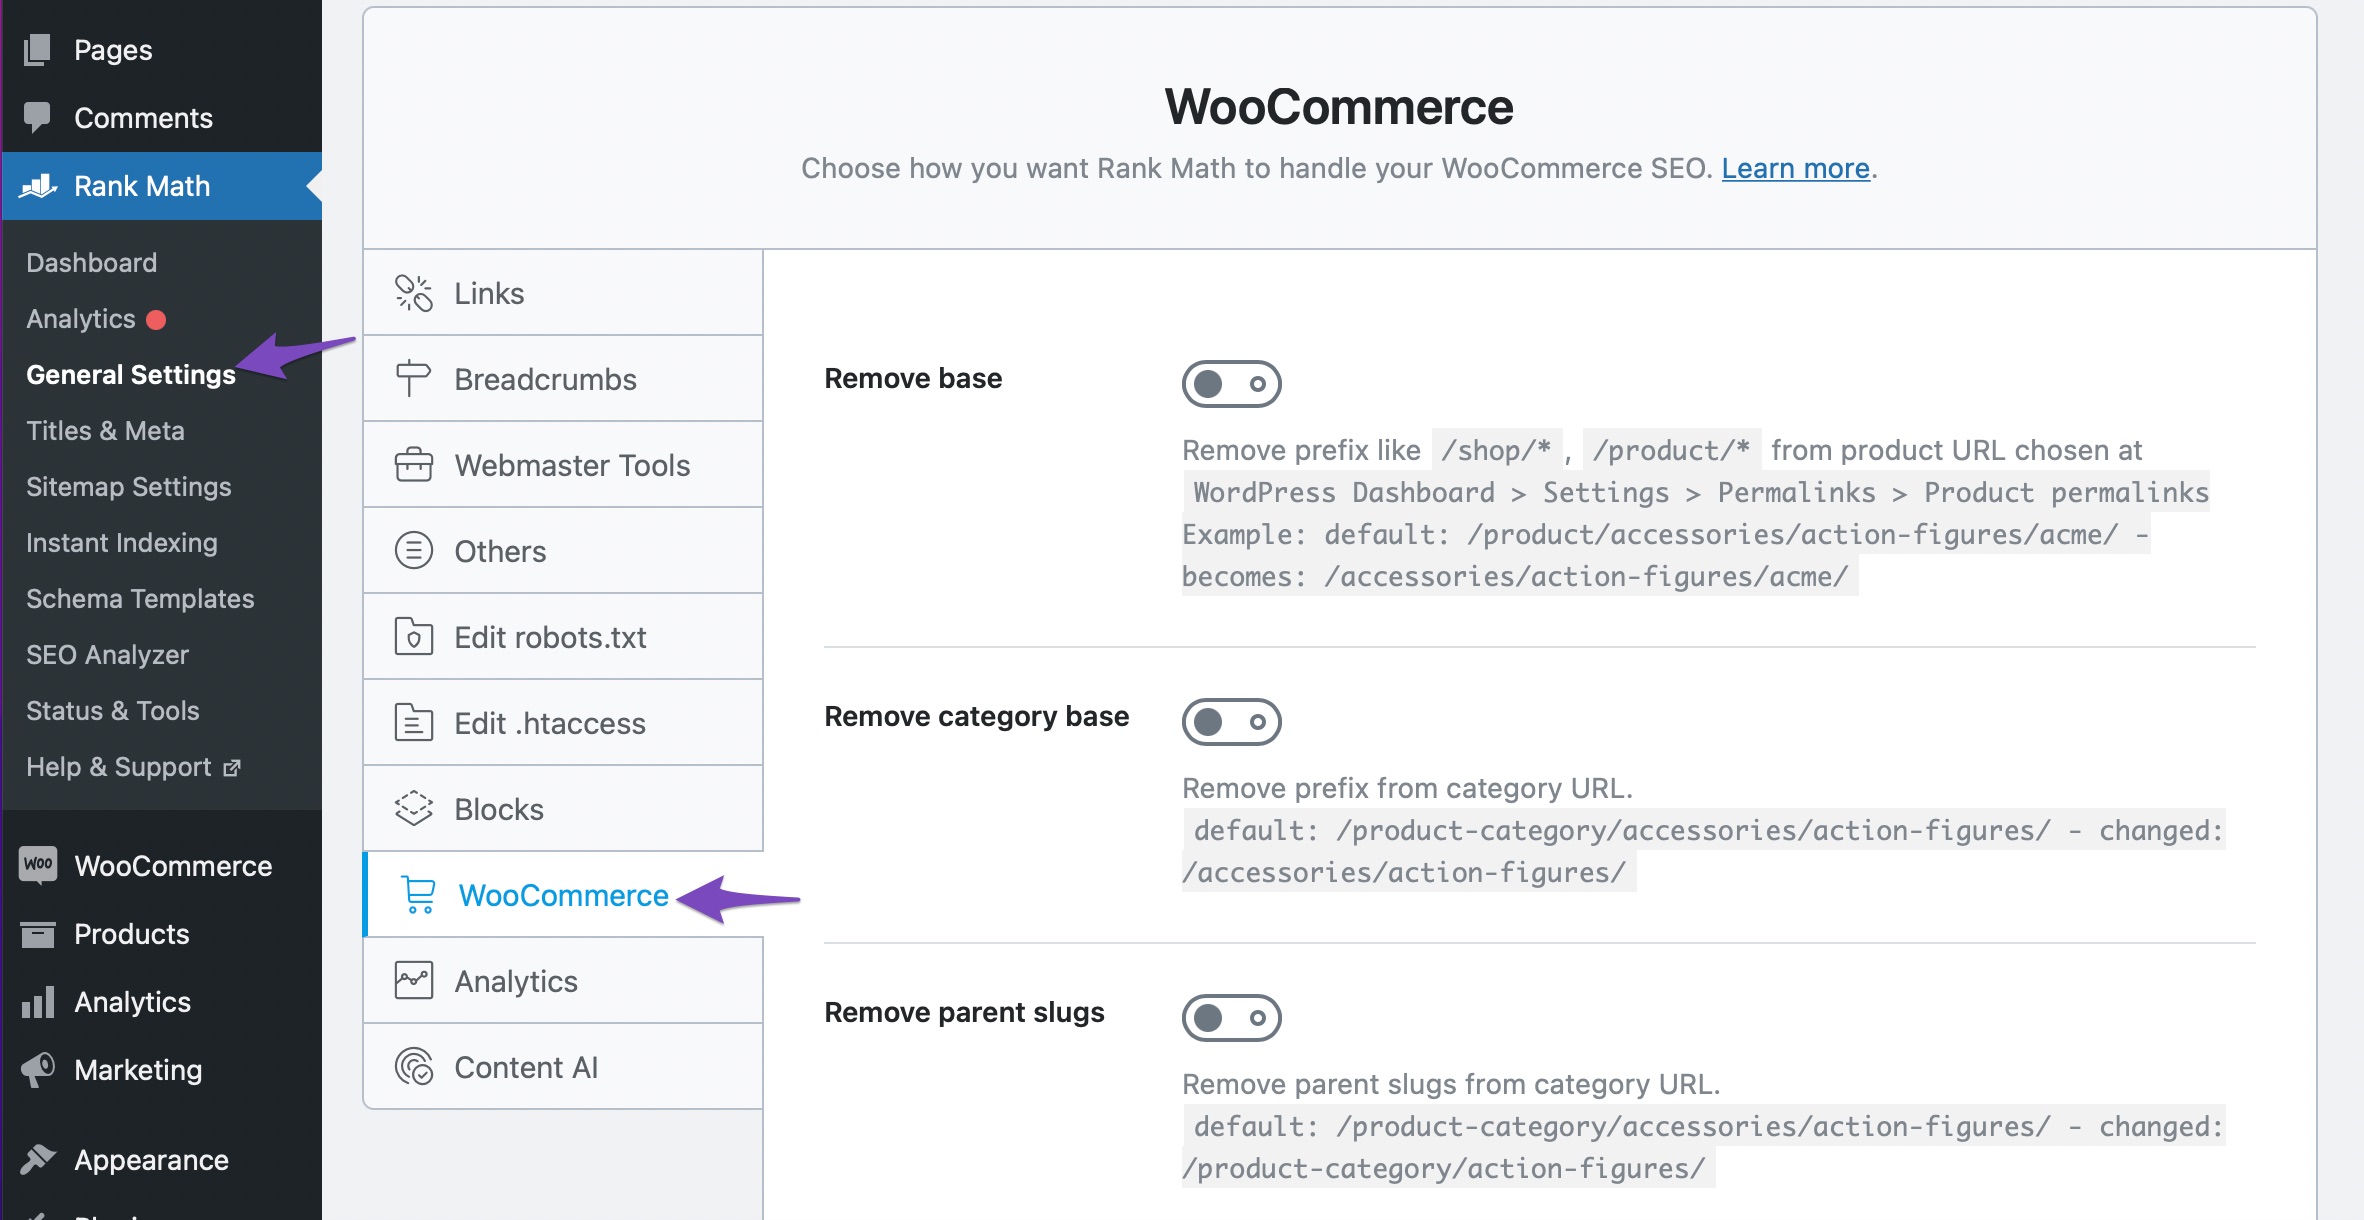 WooCommerce settings in Rank Math to optimize a category page.